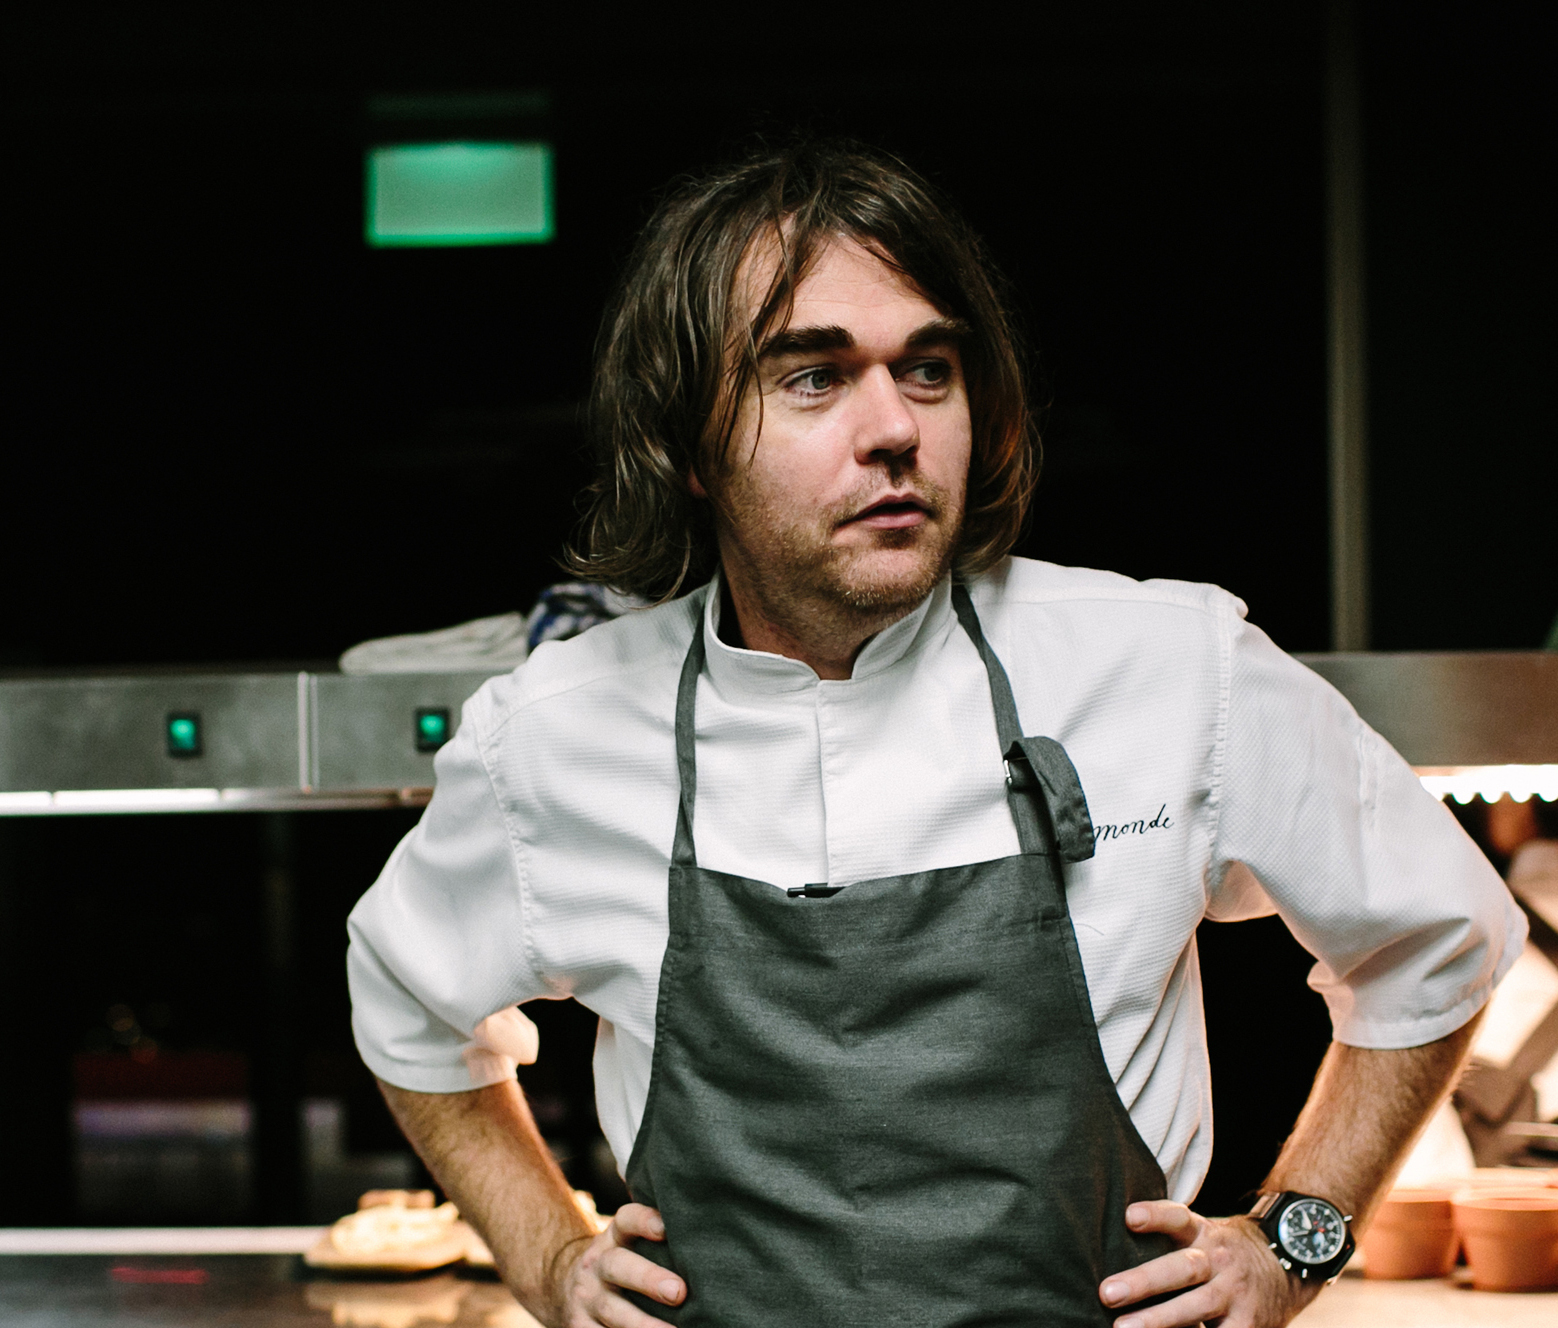 Shannon Bennett poses in the kitchen at his restaurant